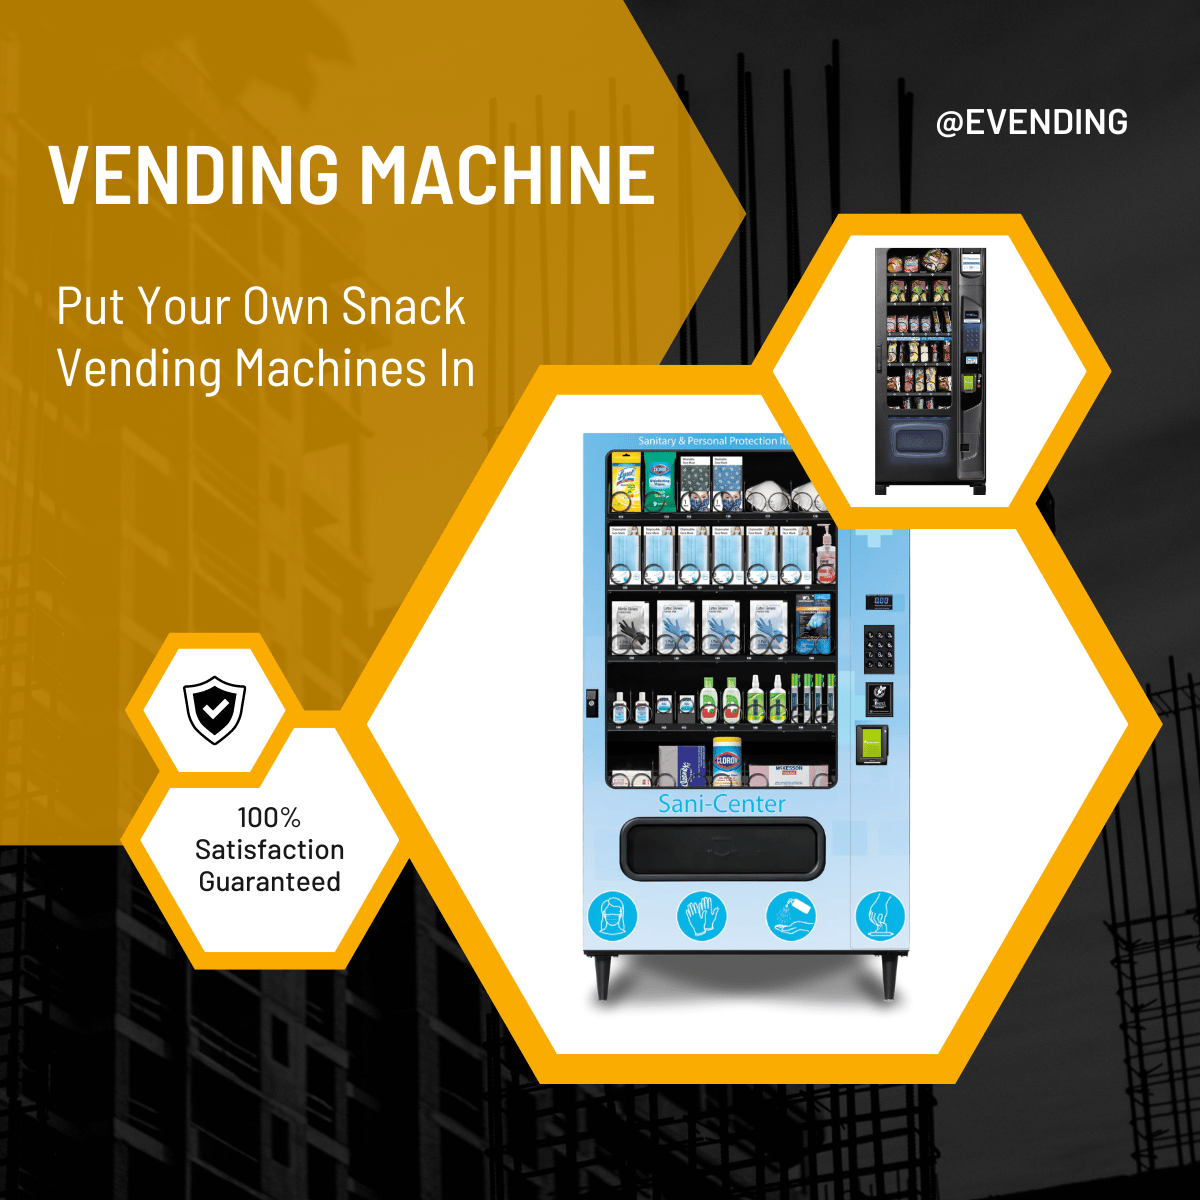 HAVE YOU BEEN LOOKING AT SNACK VENDING MACHINES FOR YOUR FACTORY FLOOR?